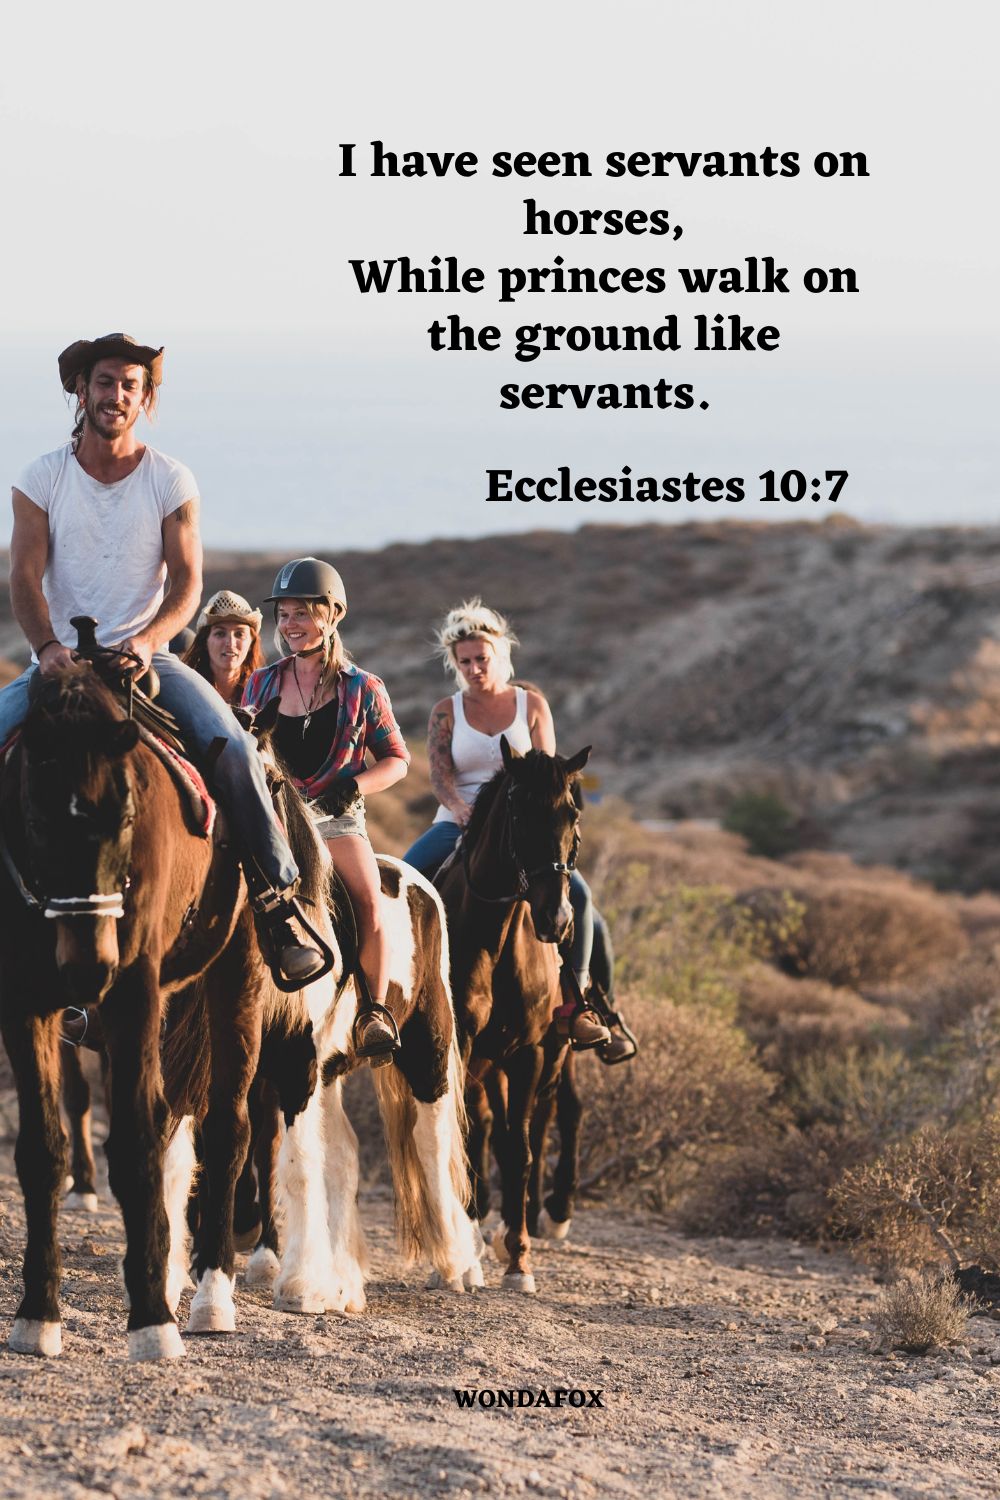 I have seen servants on horses, While princes walk on the ground like servants.
Ecclesiastes 10:7